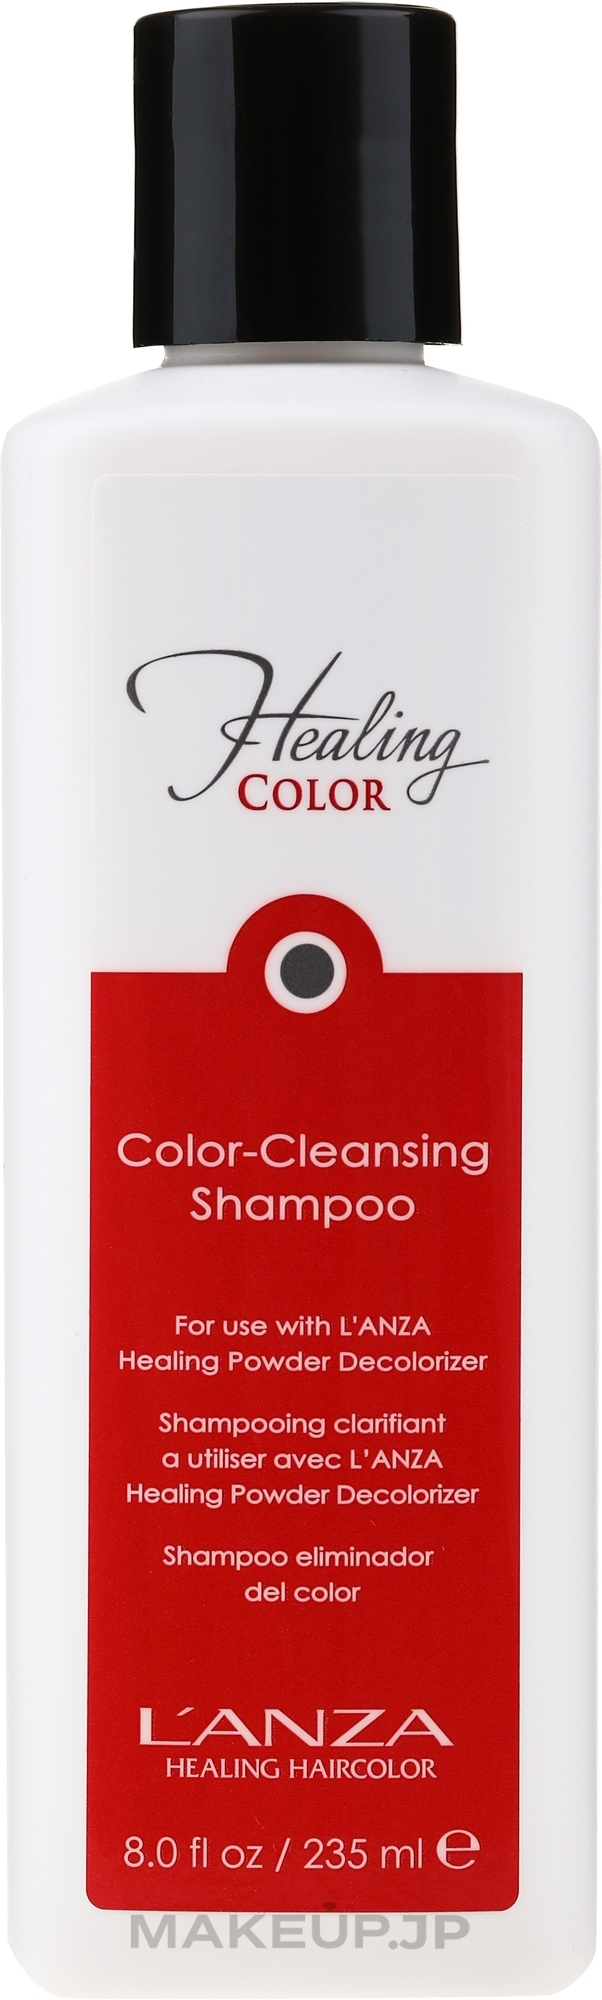 Color Cleansing Shampoo - L'anza Healing Color Cleansing Shampoo — photo 235 ml